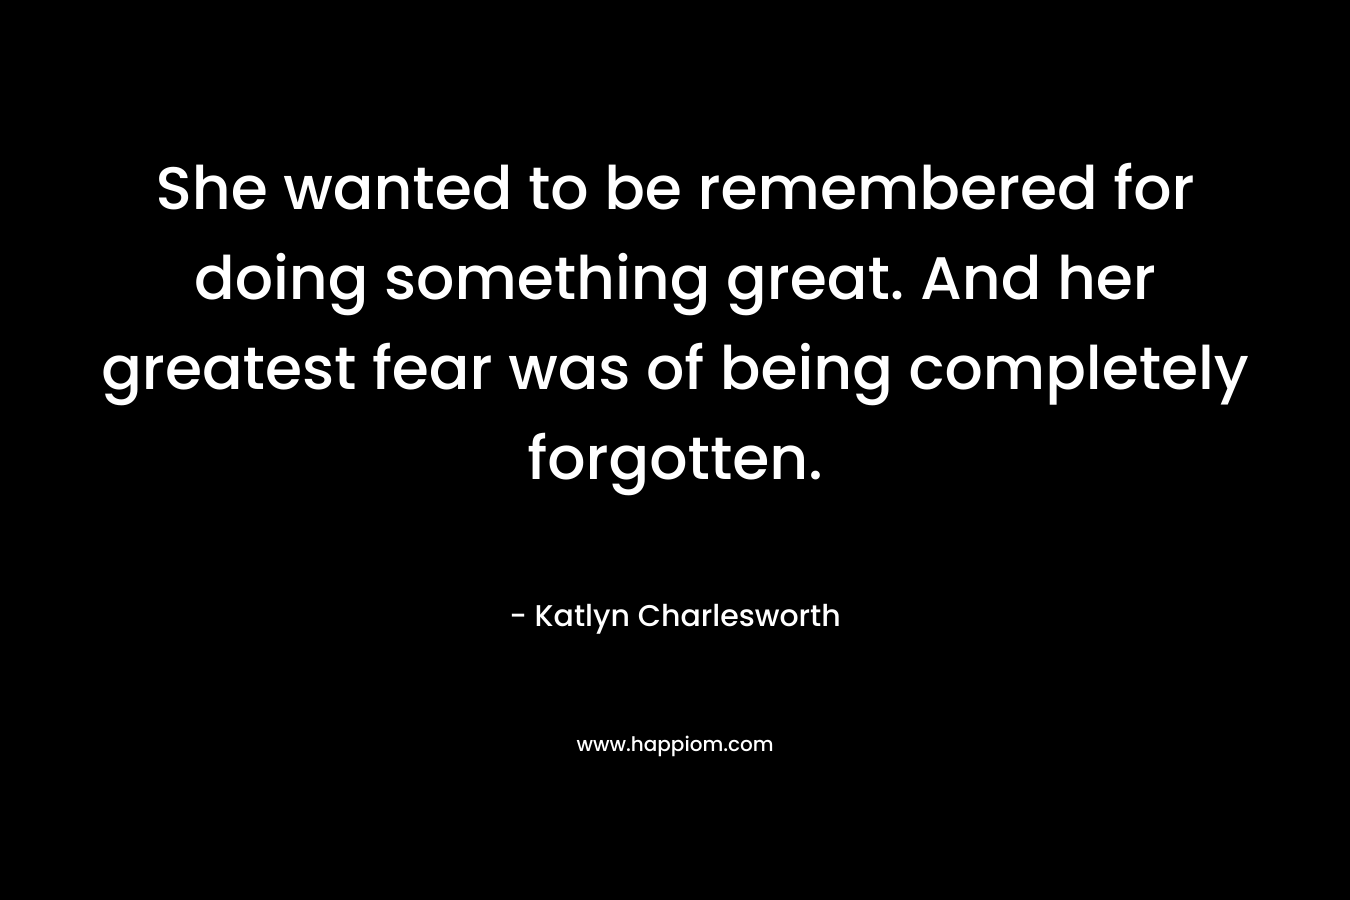 She wanted to be remembered for doing something great. And her greatest fear was of being completely forgotten.